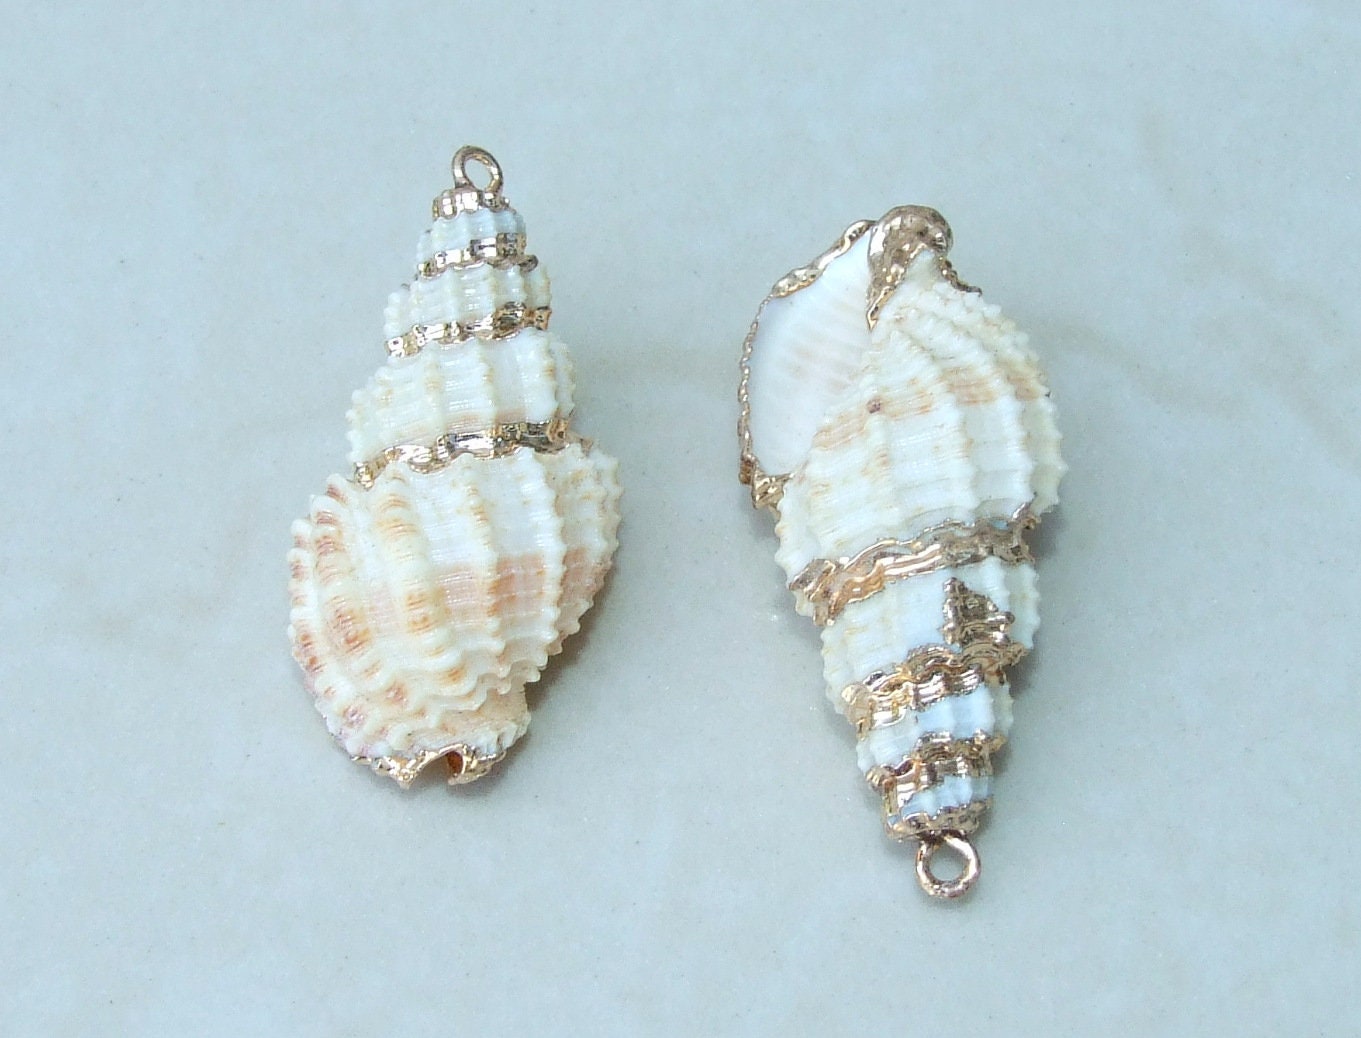 Natural Gold Edge Spiral Sea Shell Pendant, Spiral Shell Bead, Seashell Pendant, Shell Jewelry, Conch Shell, Ocean Jewelry, 35-40mm, 04A